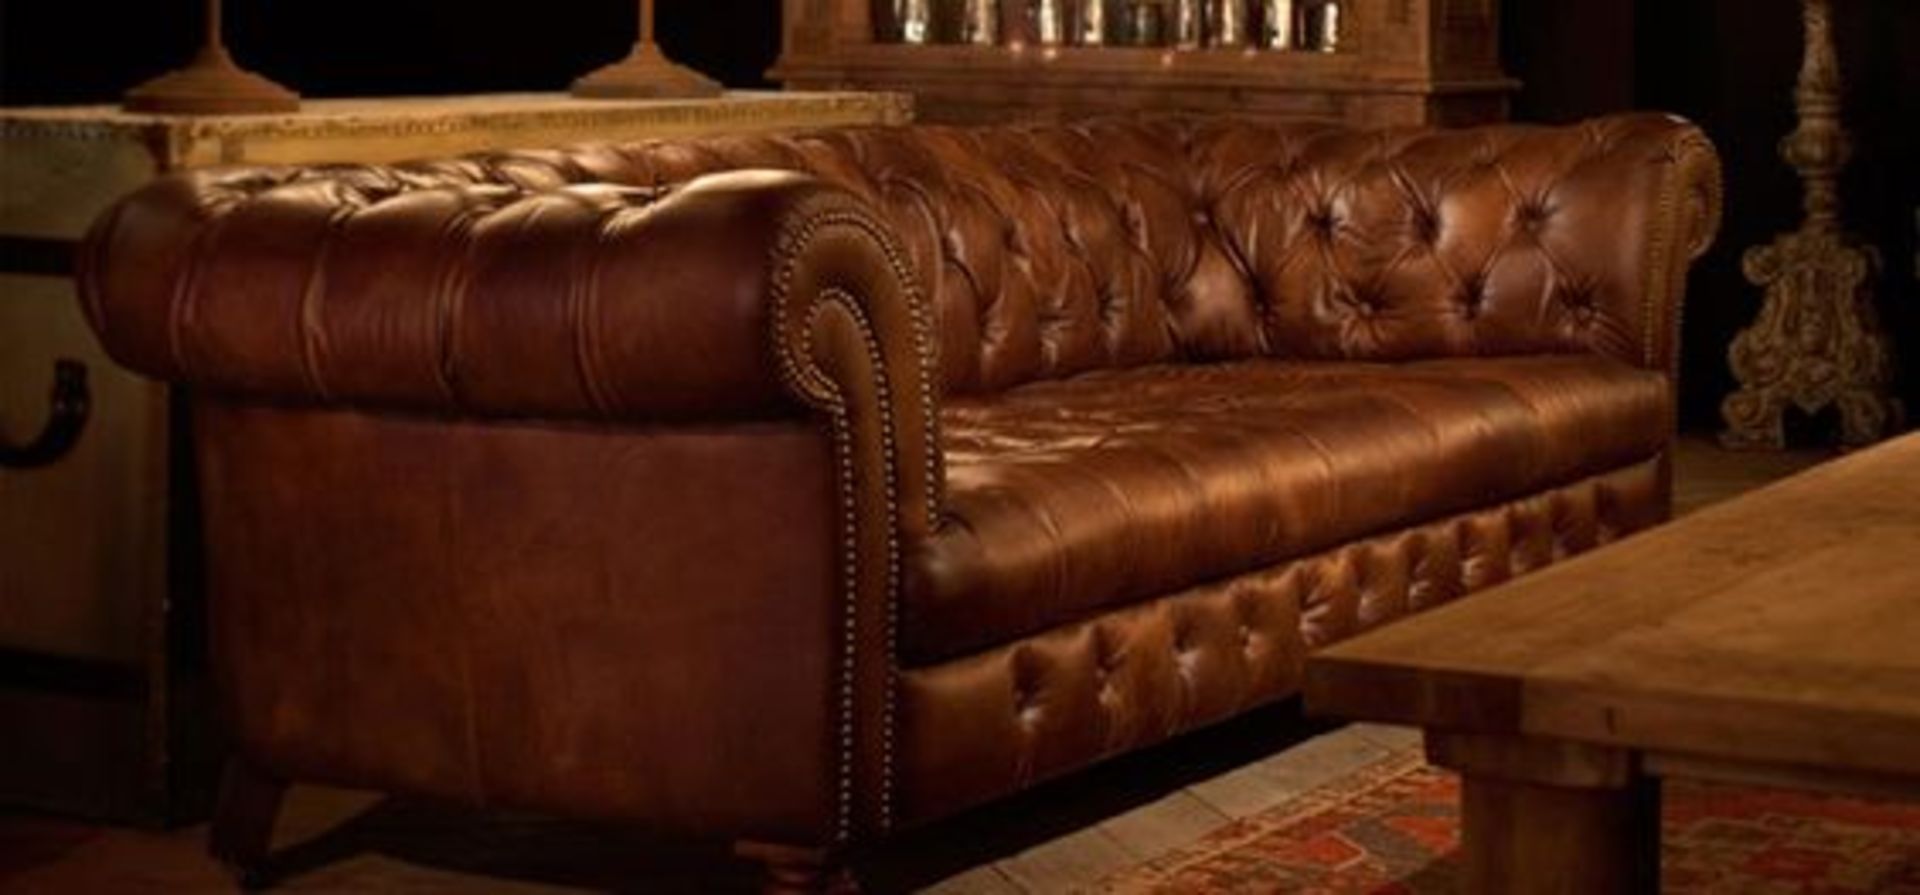 Old Grand Library Chesterfield 1 Straight Without Button Antique Whisky 123 X 100 X 72cm - Image 2 of 2